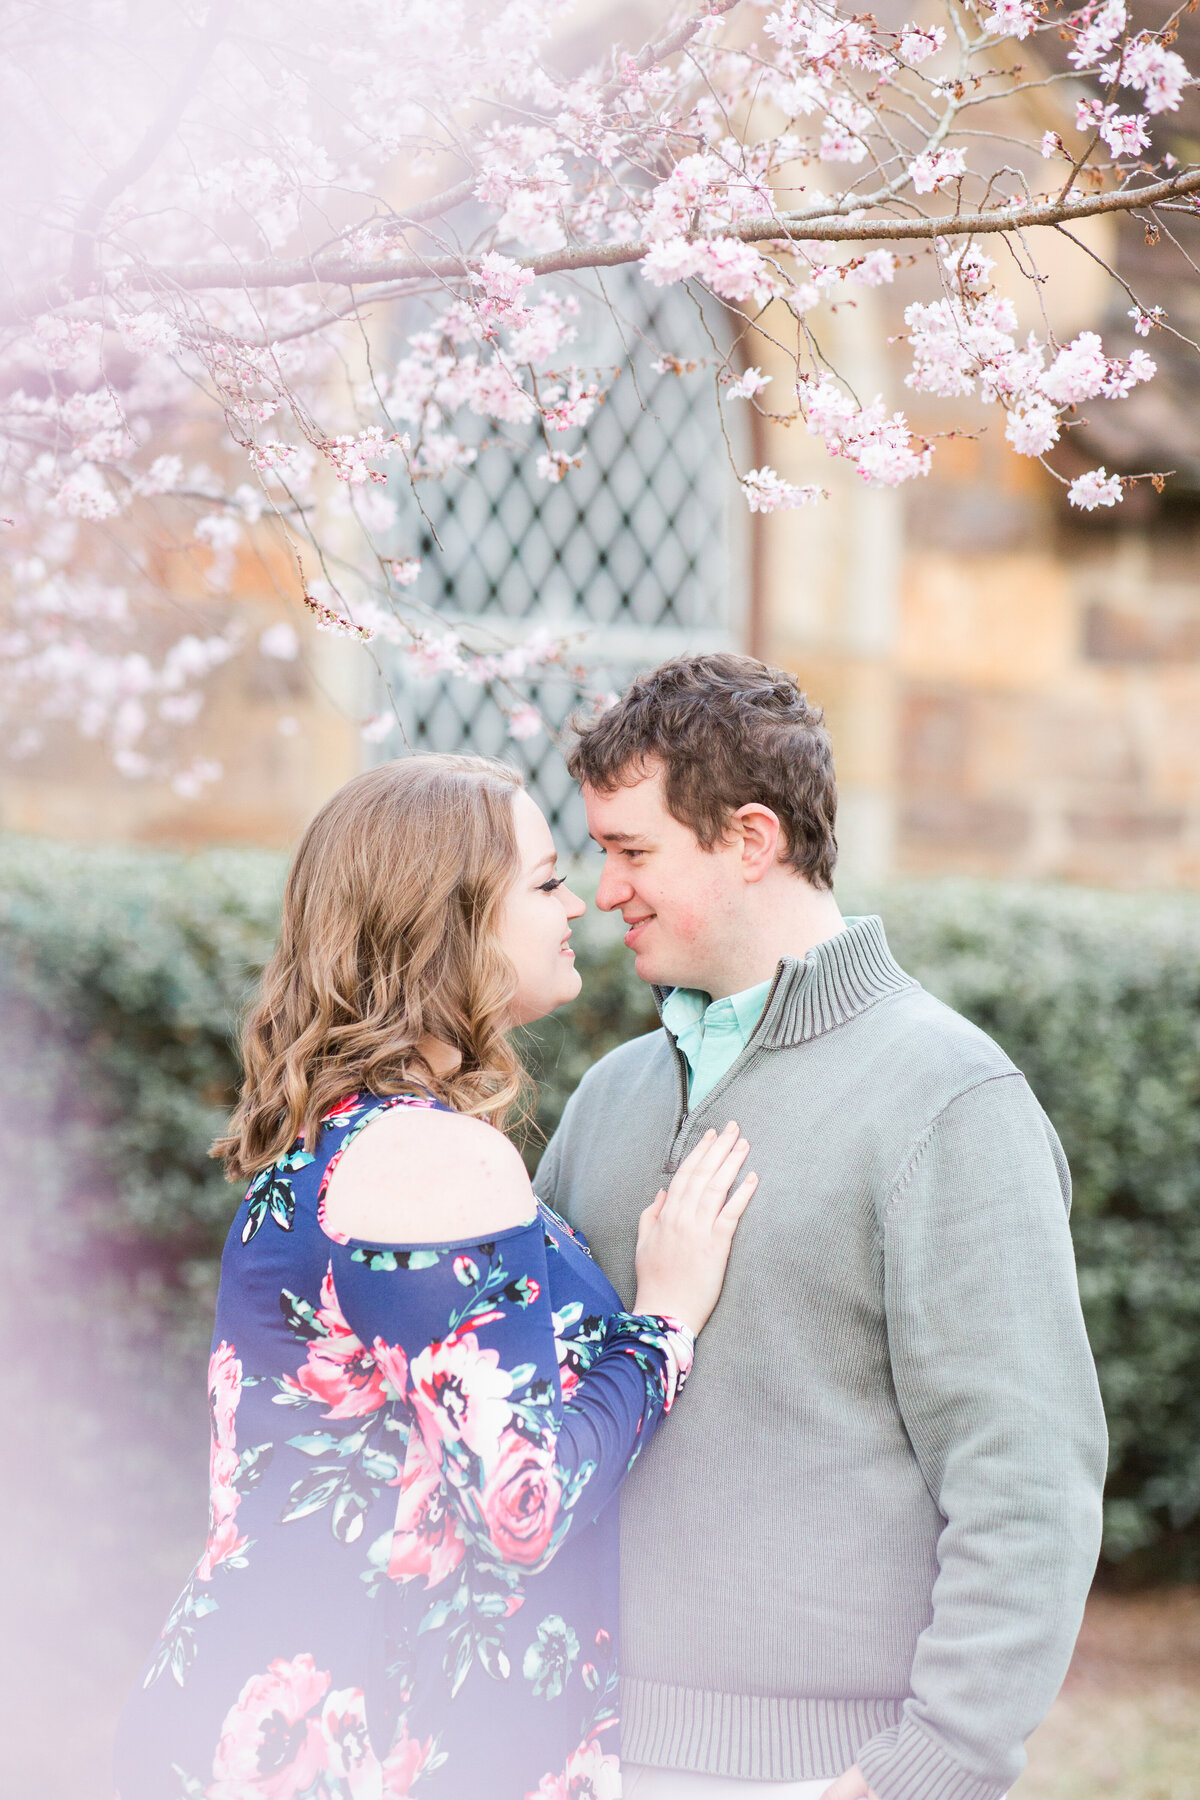 A couple at Berry College in Rome Georgia for light and airy engagement portraits session by Jennifer Marie Studios, top Atlanta Georgia wedding photographer.